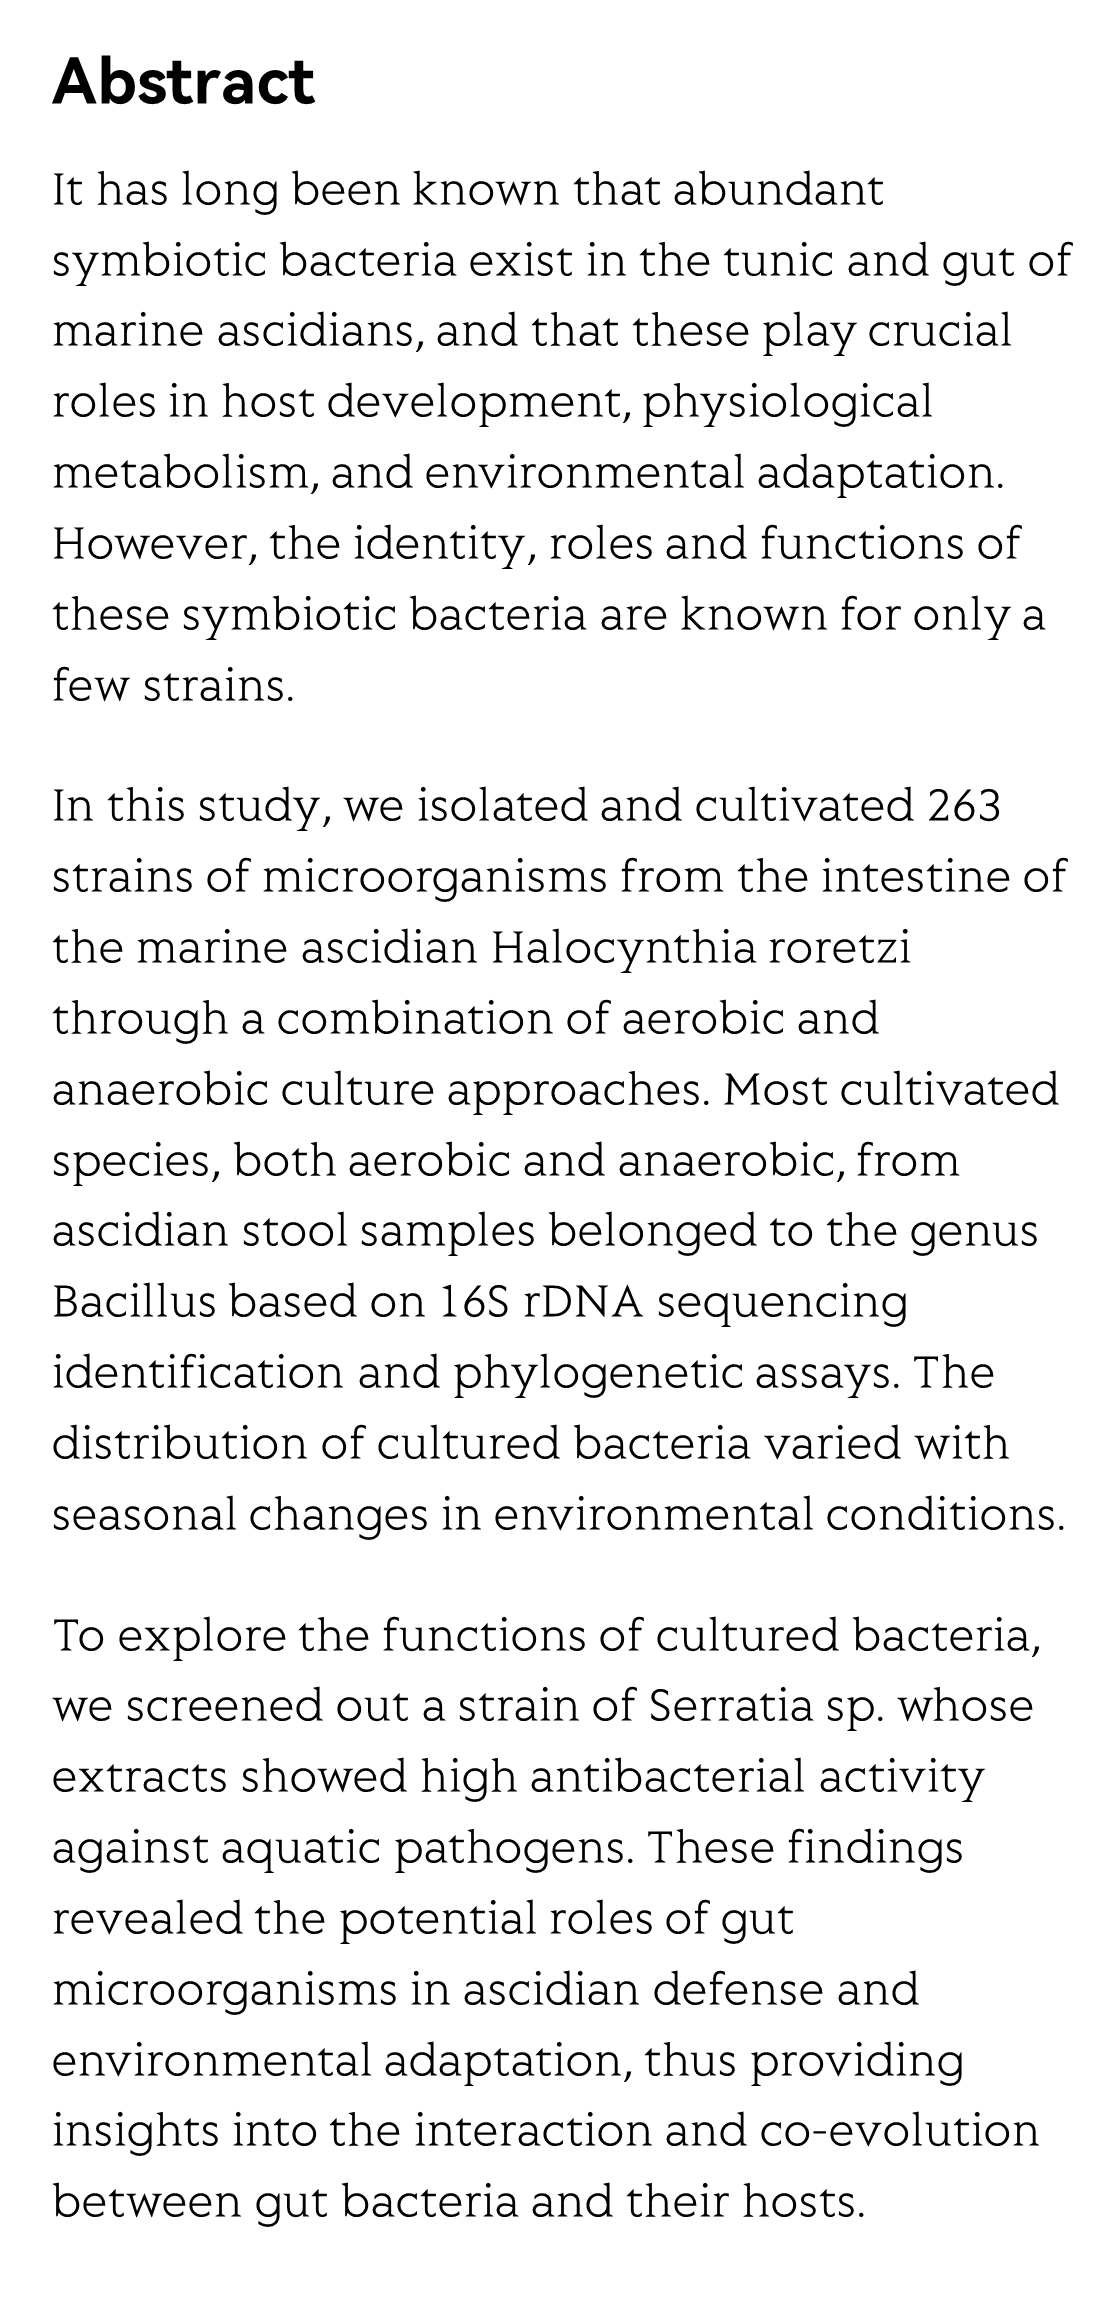 Cultivation of gut microorganisms of the marine ascidian Halocynthia roretzi reveals their potential roles in the environmental adaptation of their host_2